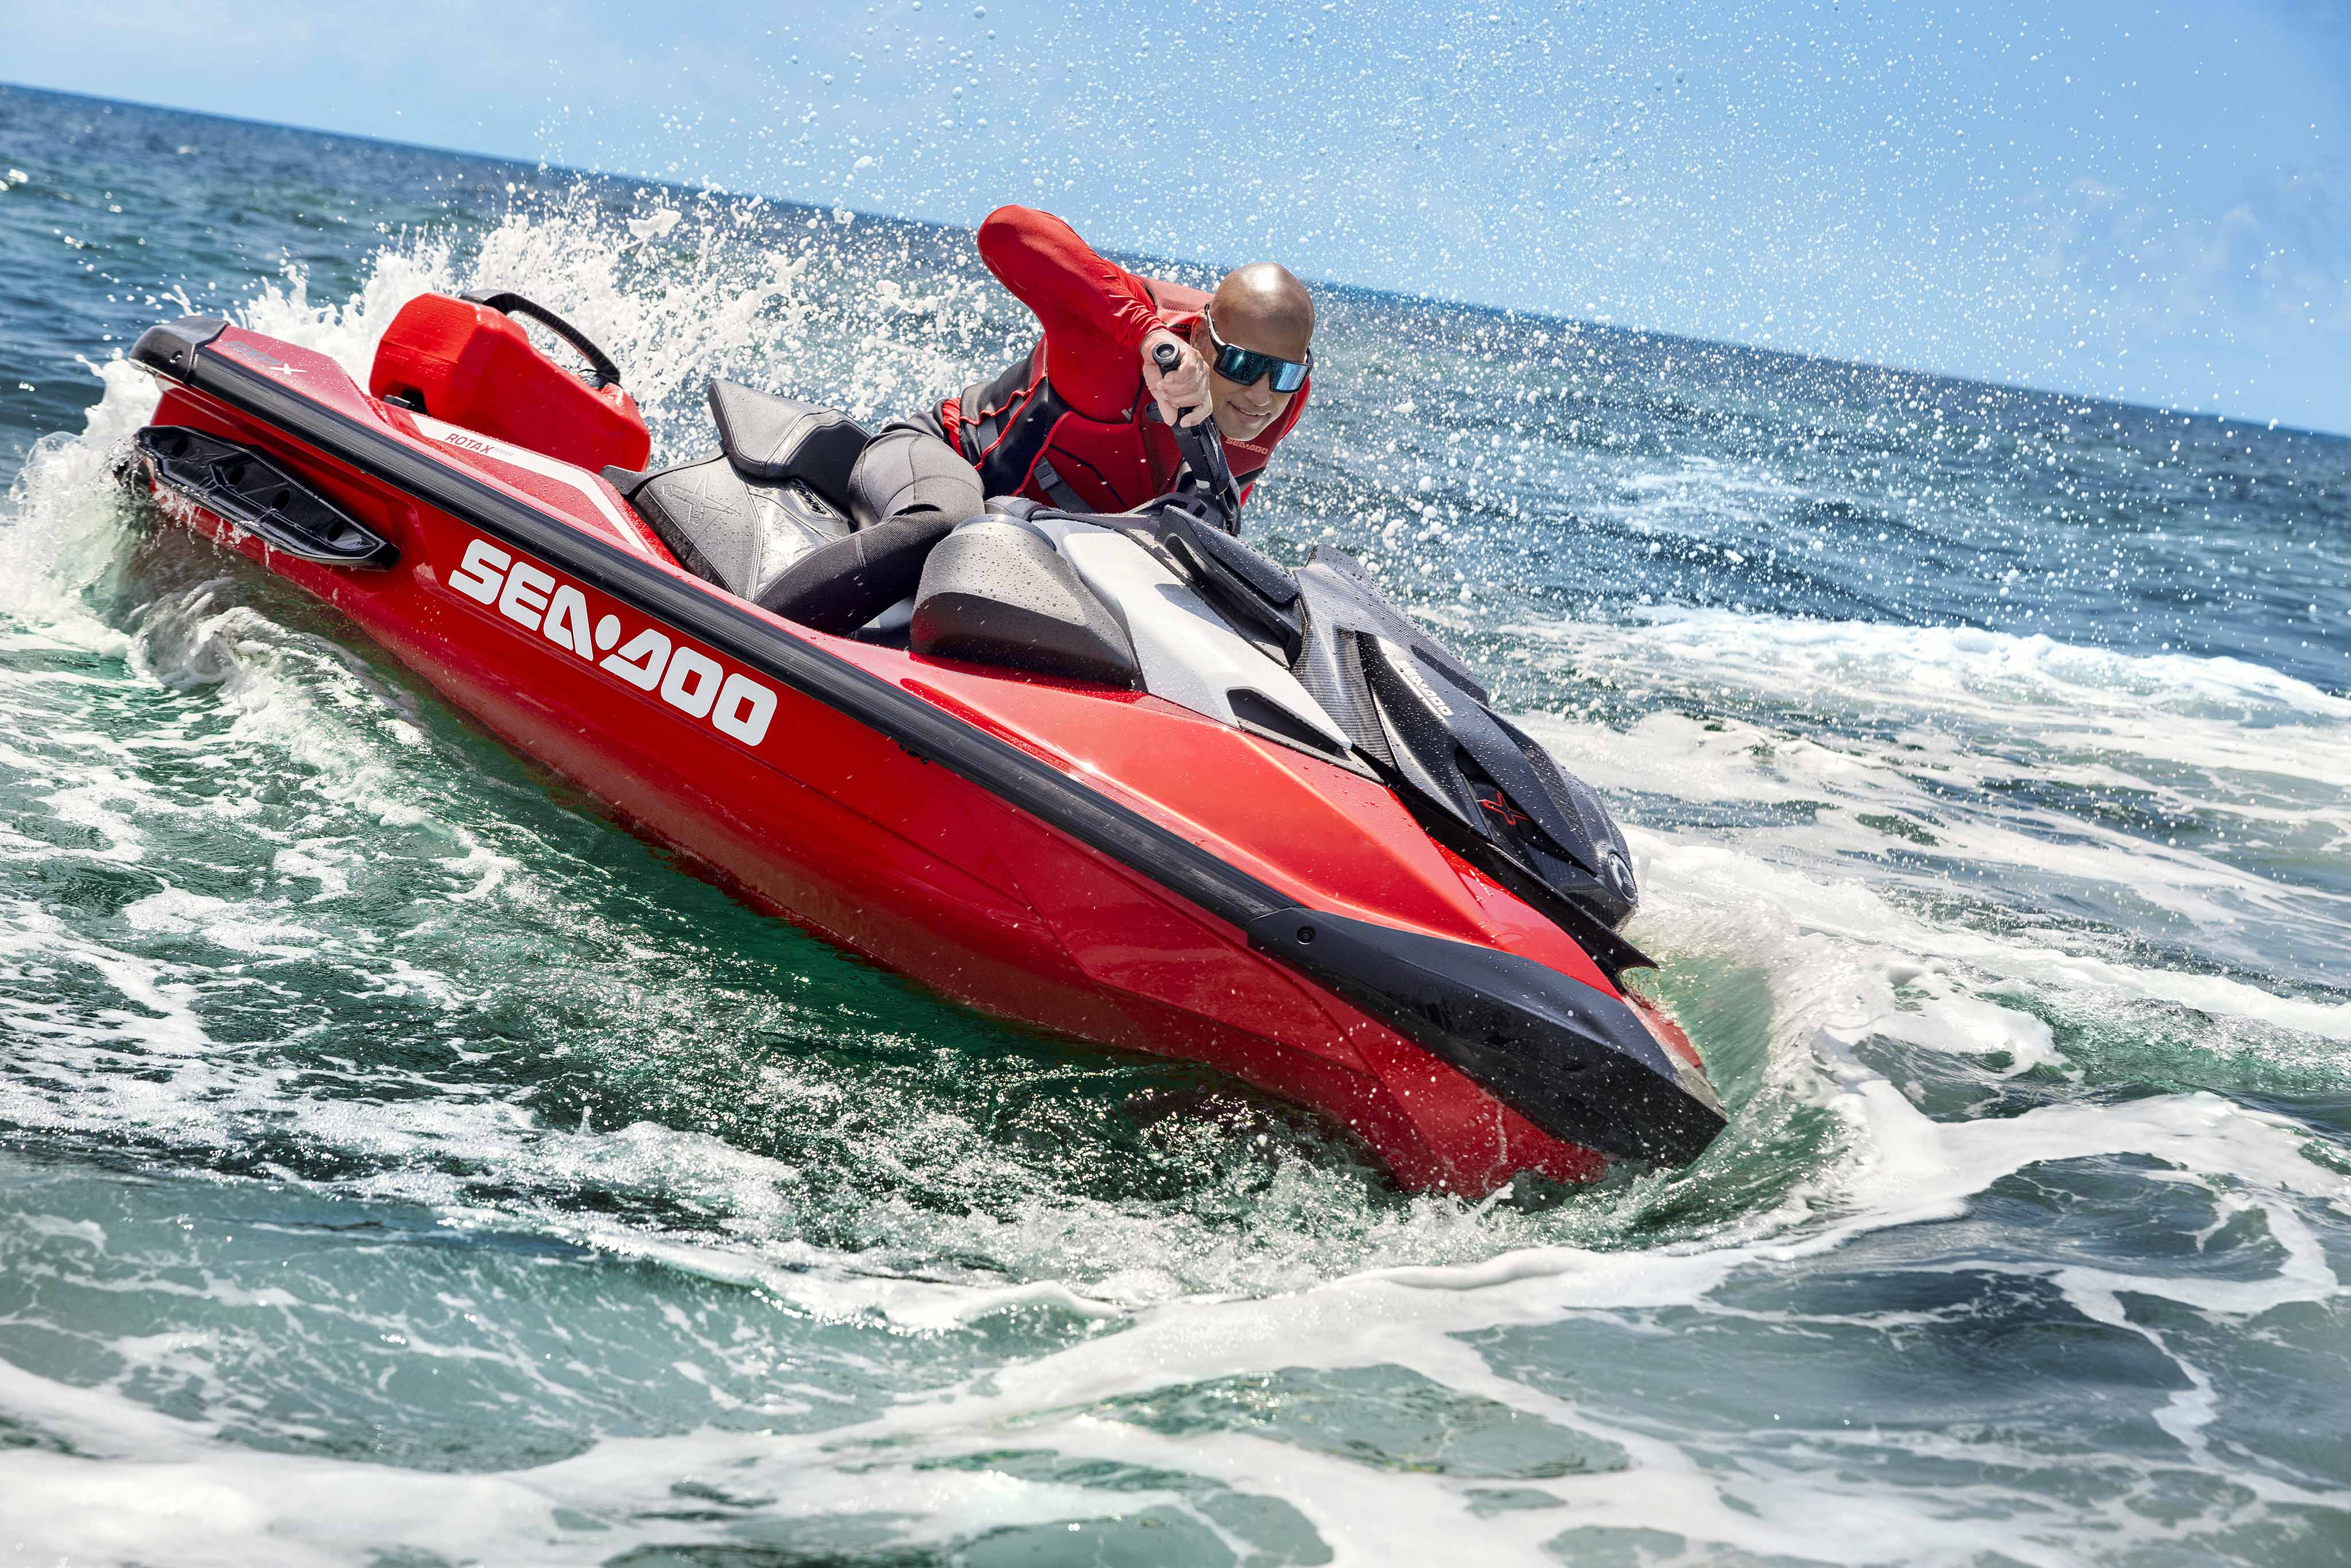 Rider doing a quick turn with the 2024 Sea-Doo RXP-X 325 personal watercraft